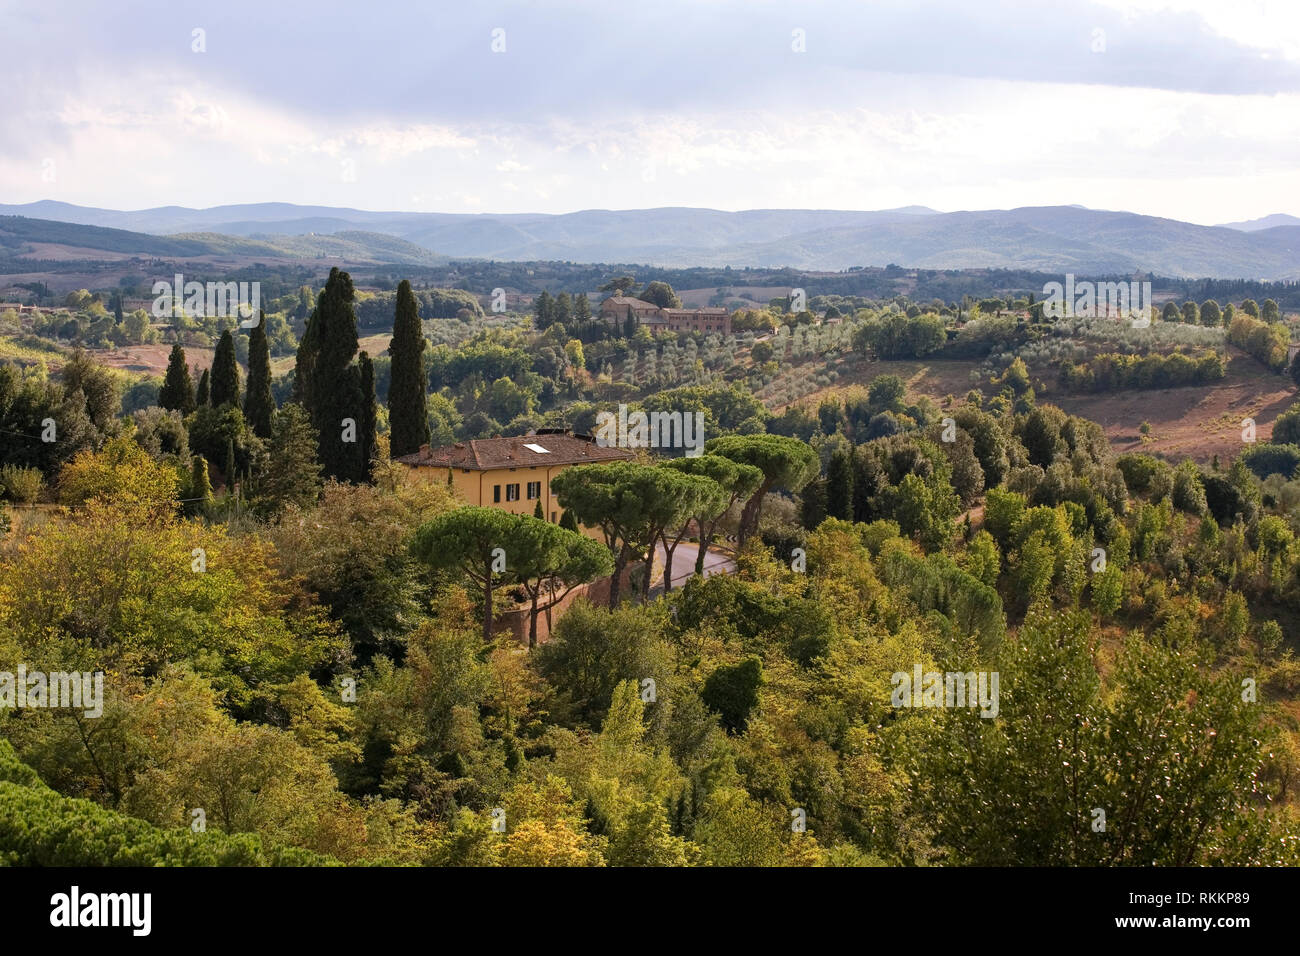 The view across the Tuscan countryside from the Piazzale Marcello Biringucci, Siena, Tuscany, Italy Stock Photo